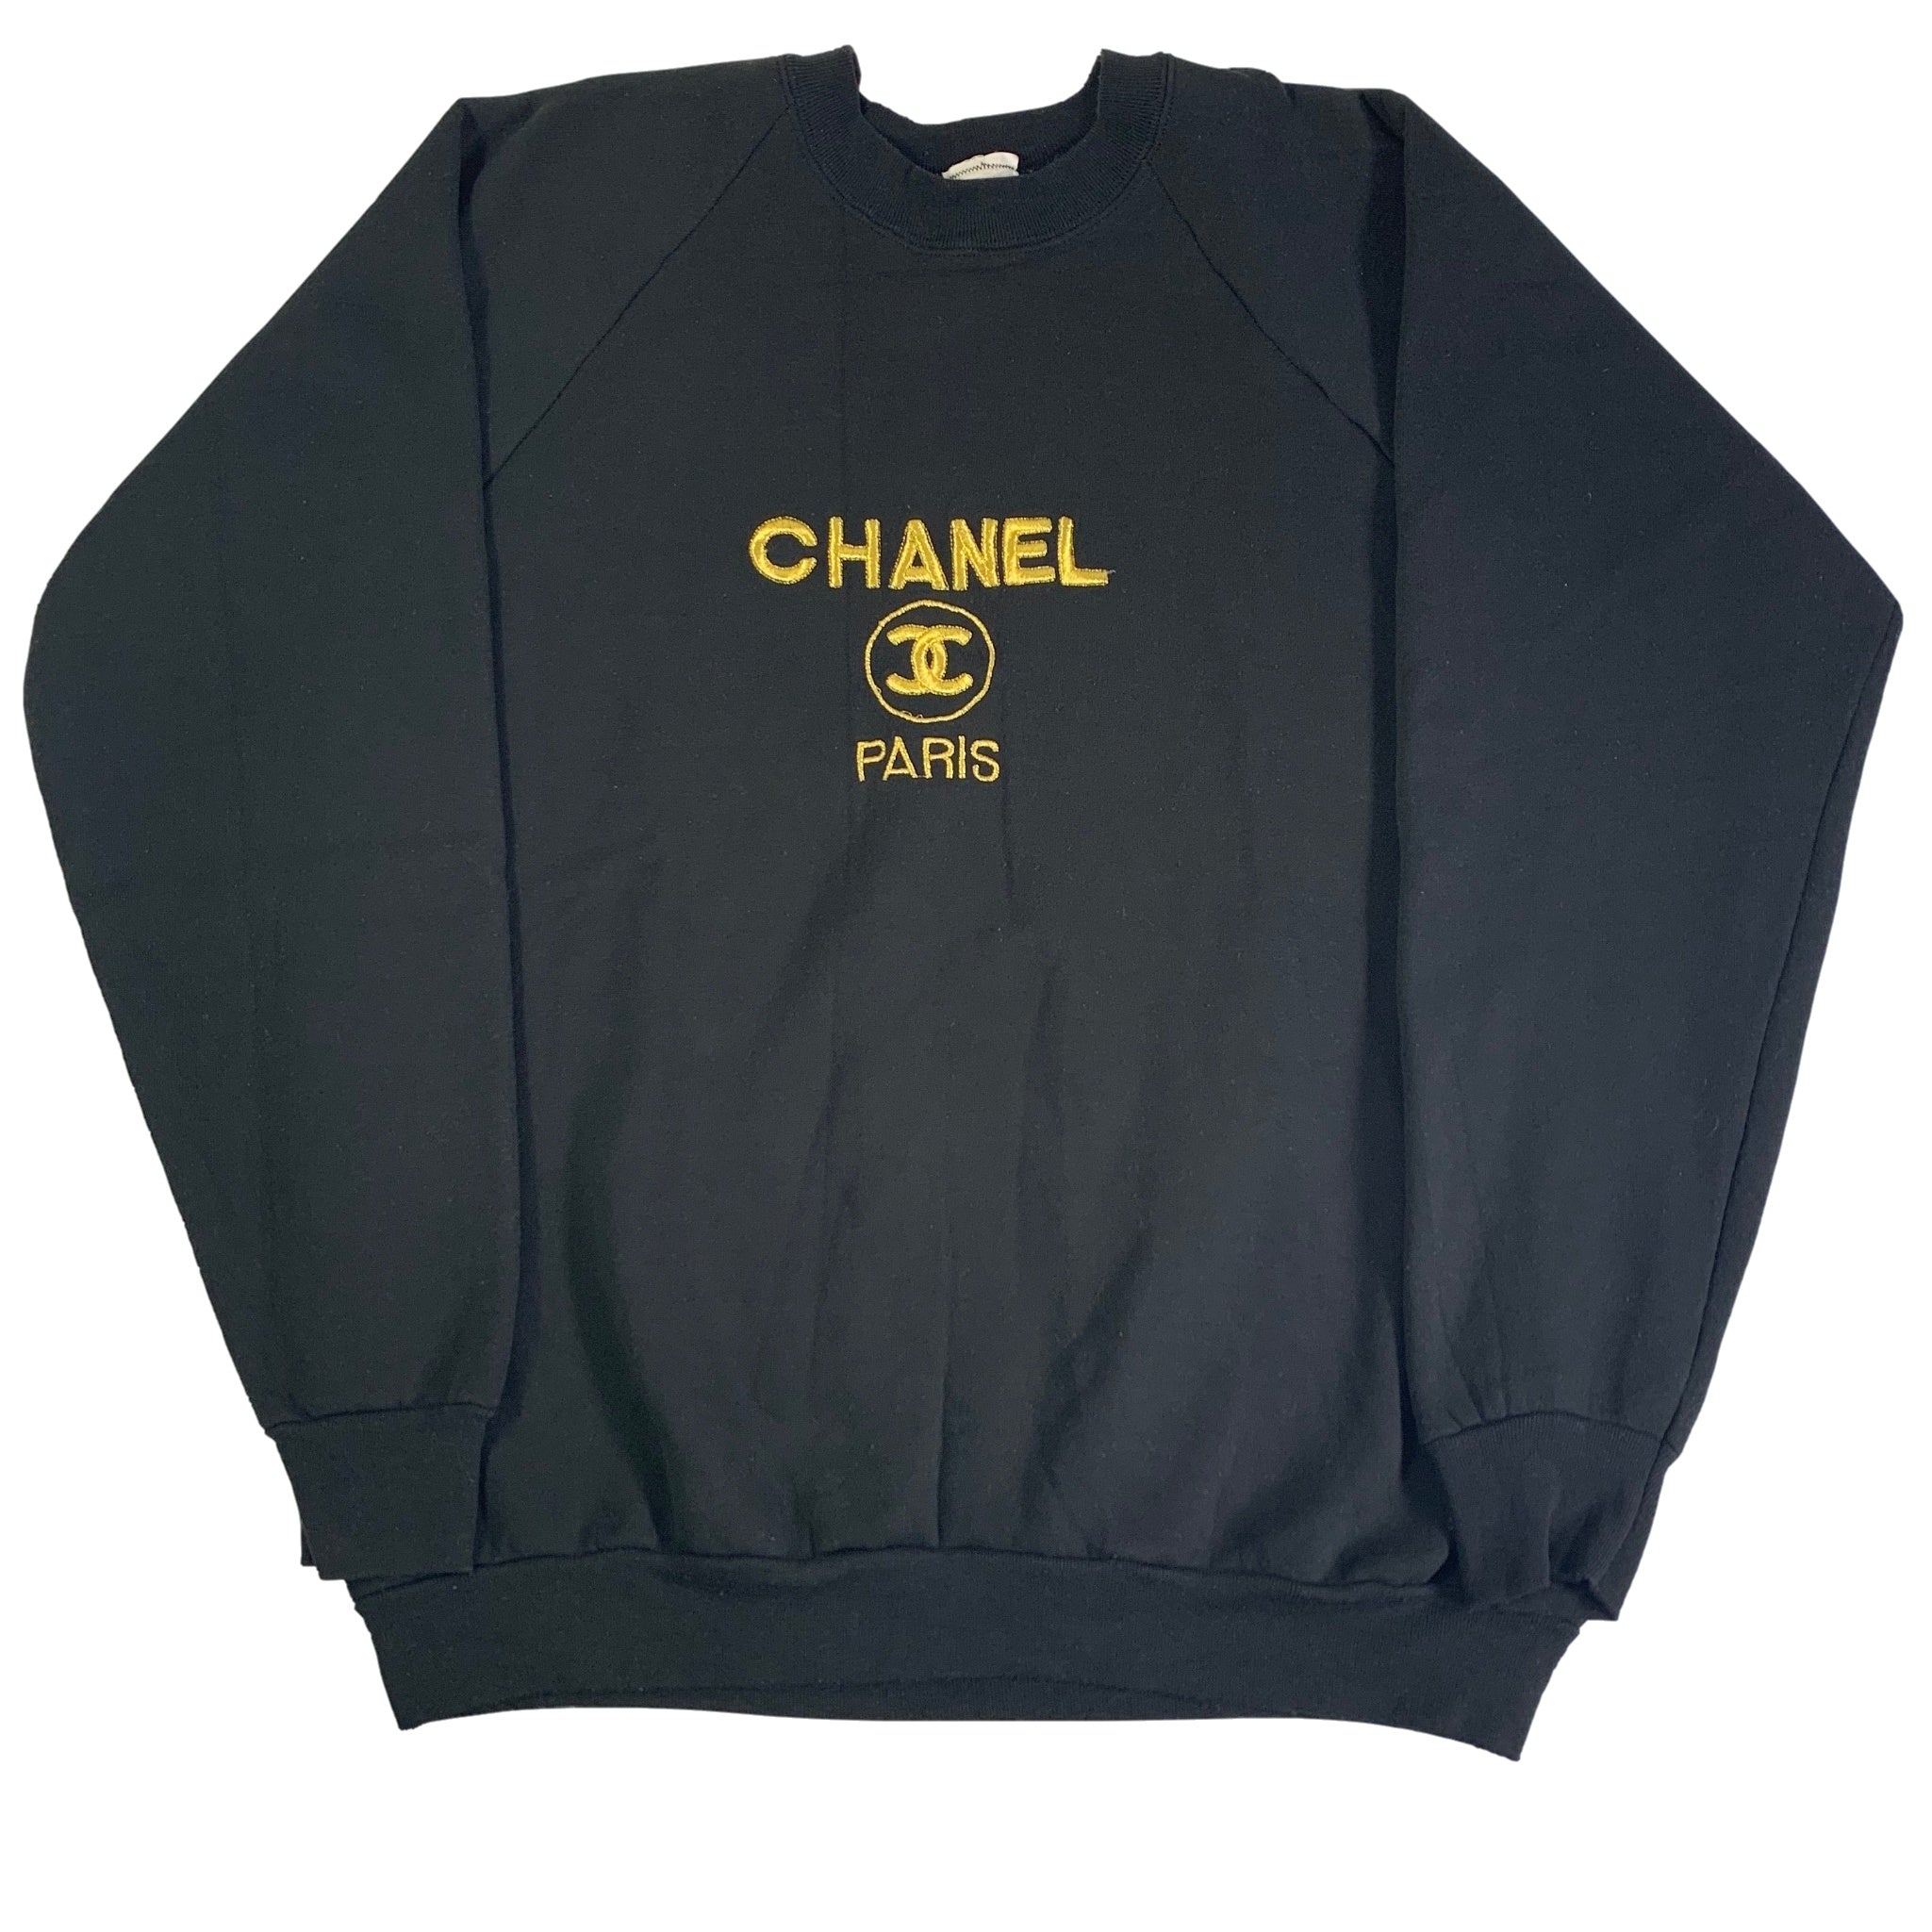 I've found many of these vintage boot Chanel crewnecks over the